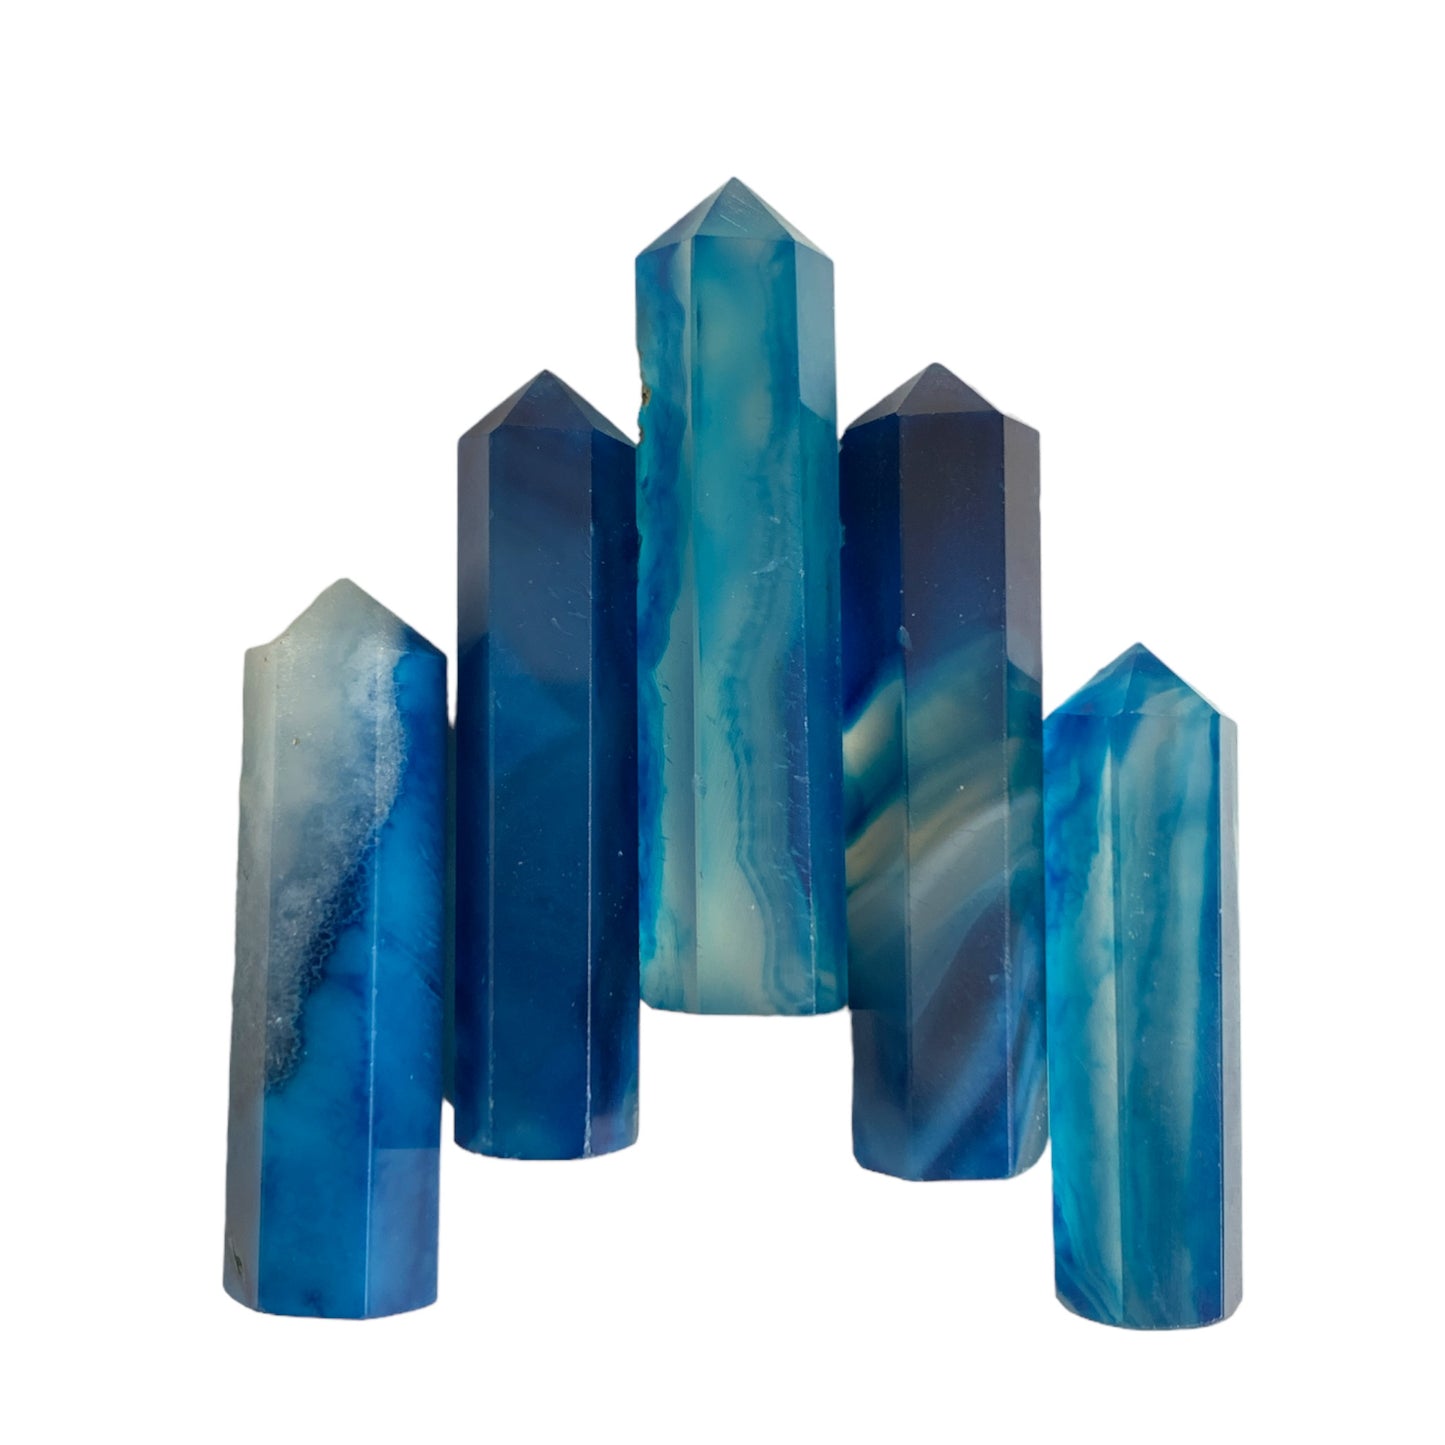 Blue Onyx - 35-40mm - Single Terminated Pencil Points - (order in 5's) - India - NEW323